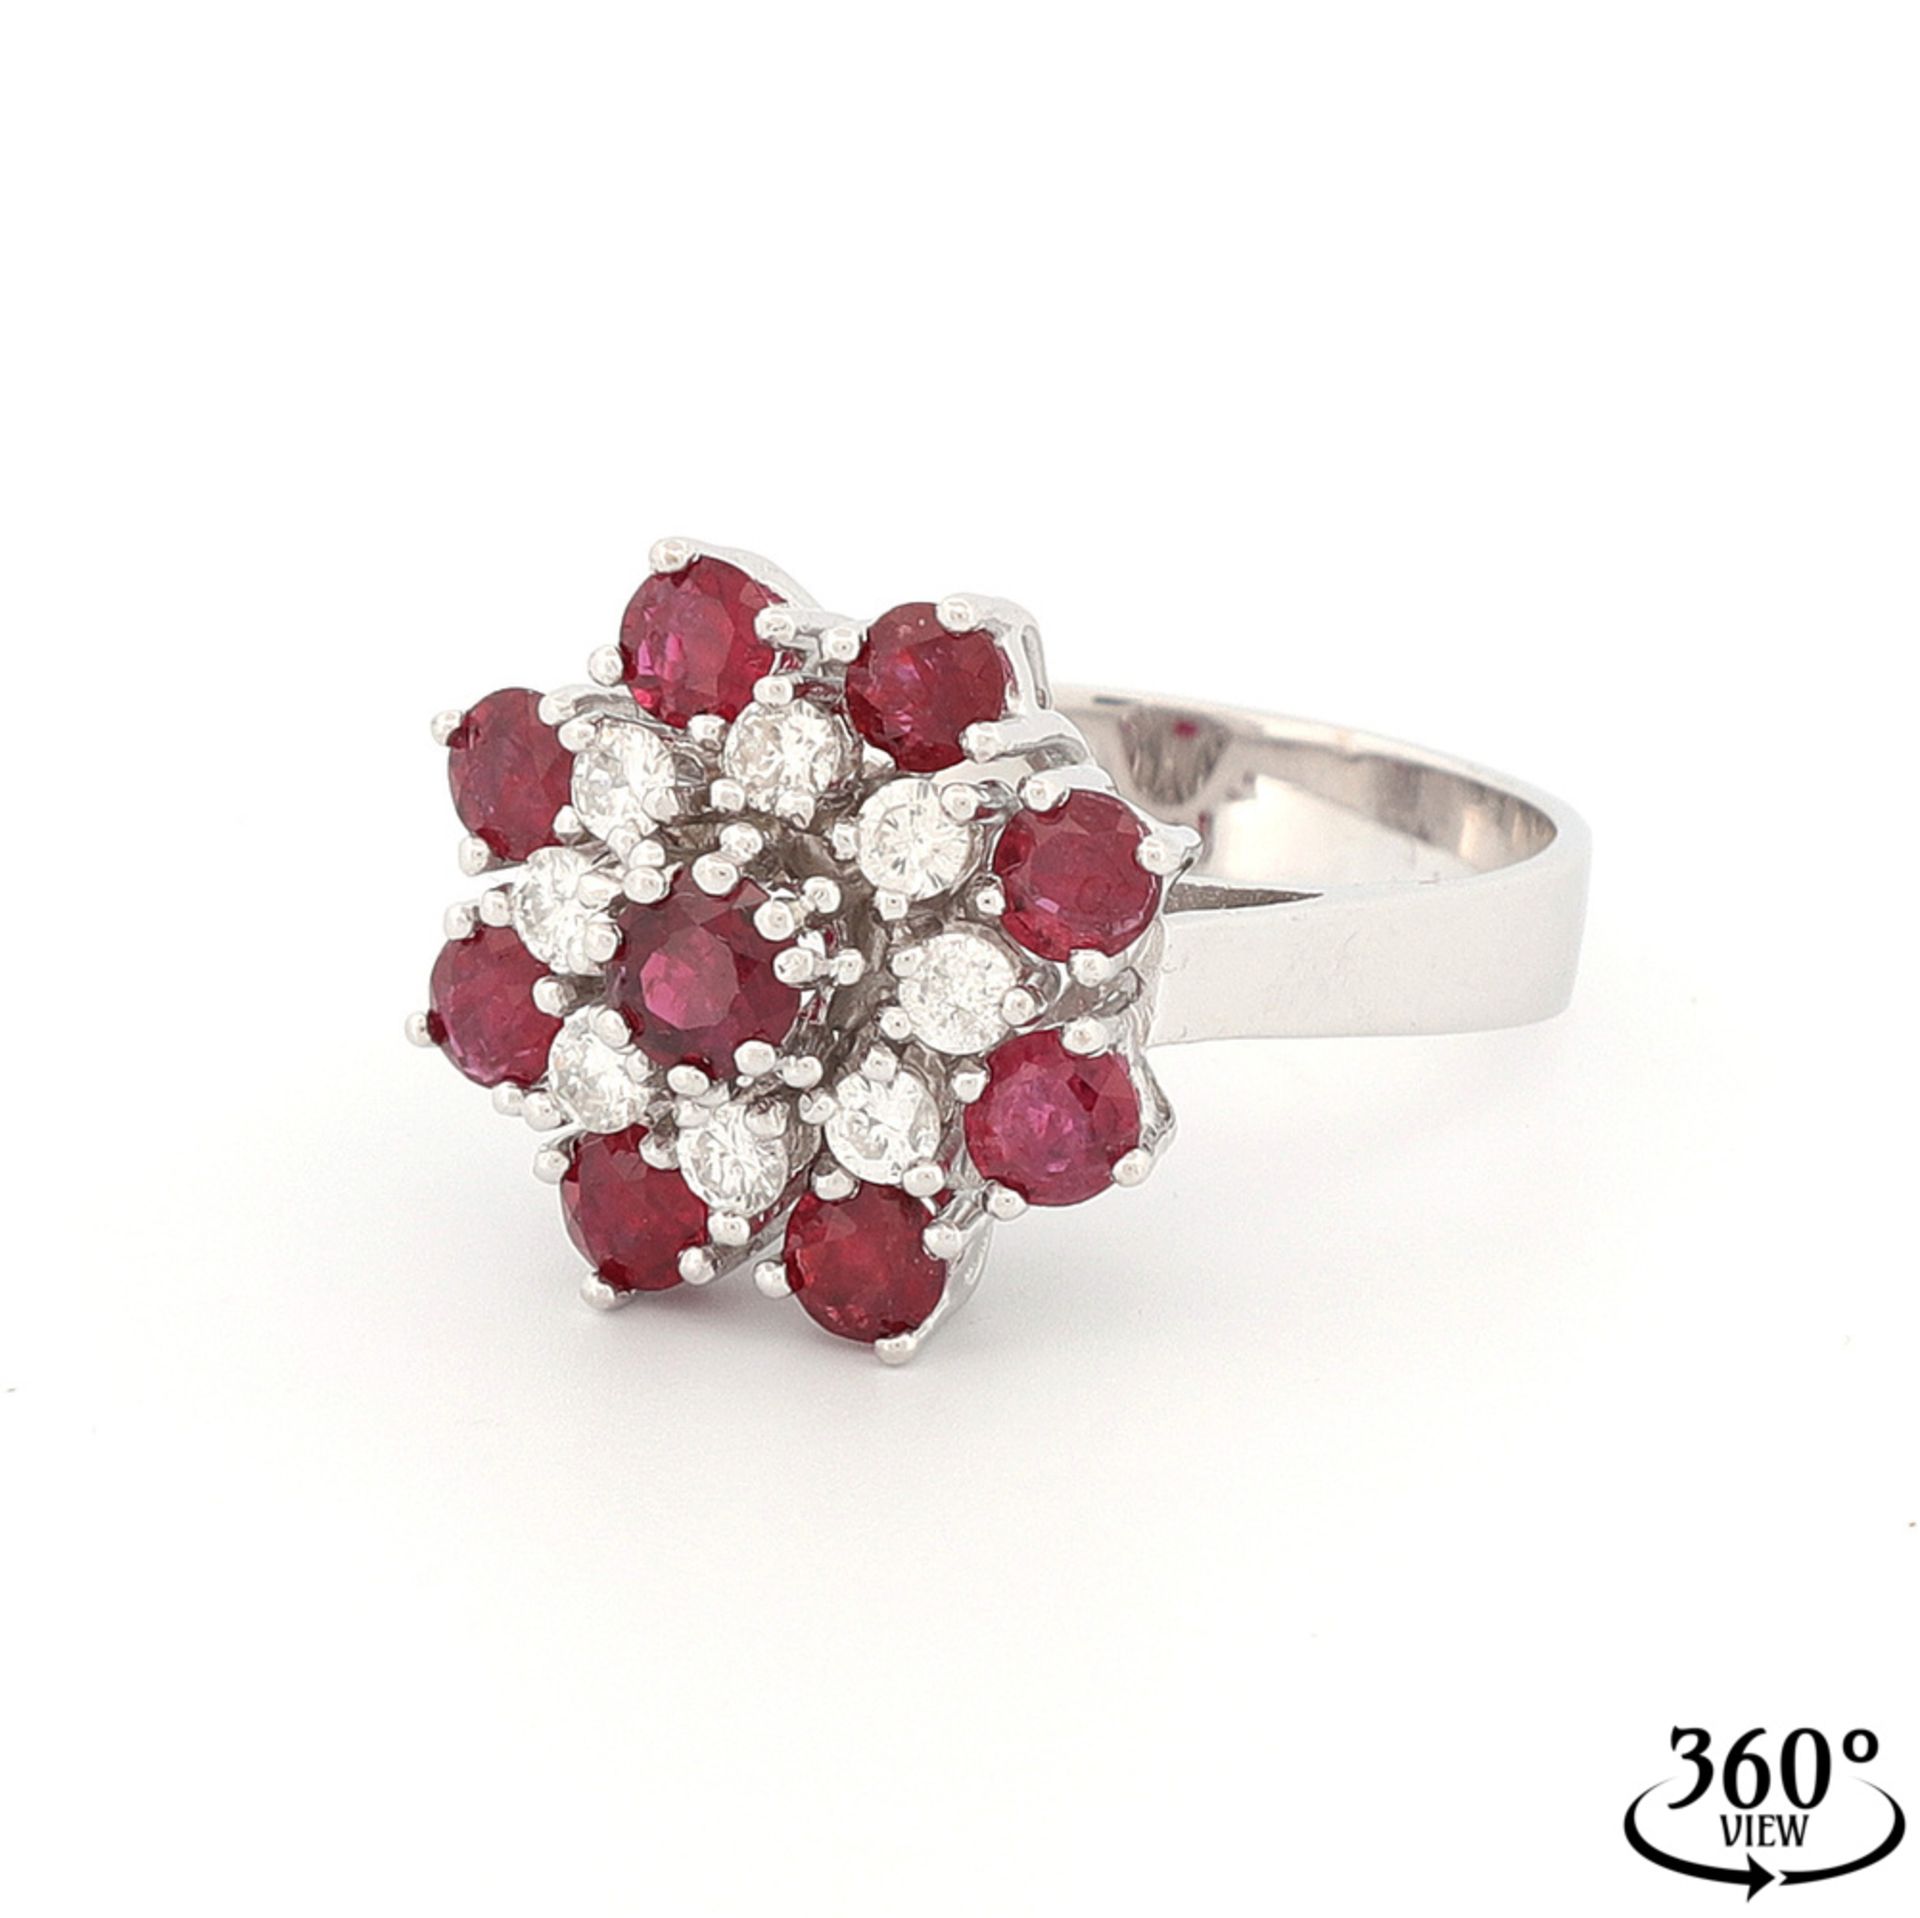 Entourage ring with rubies and brilliants